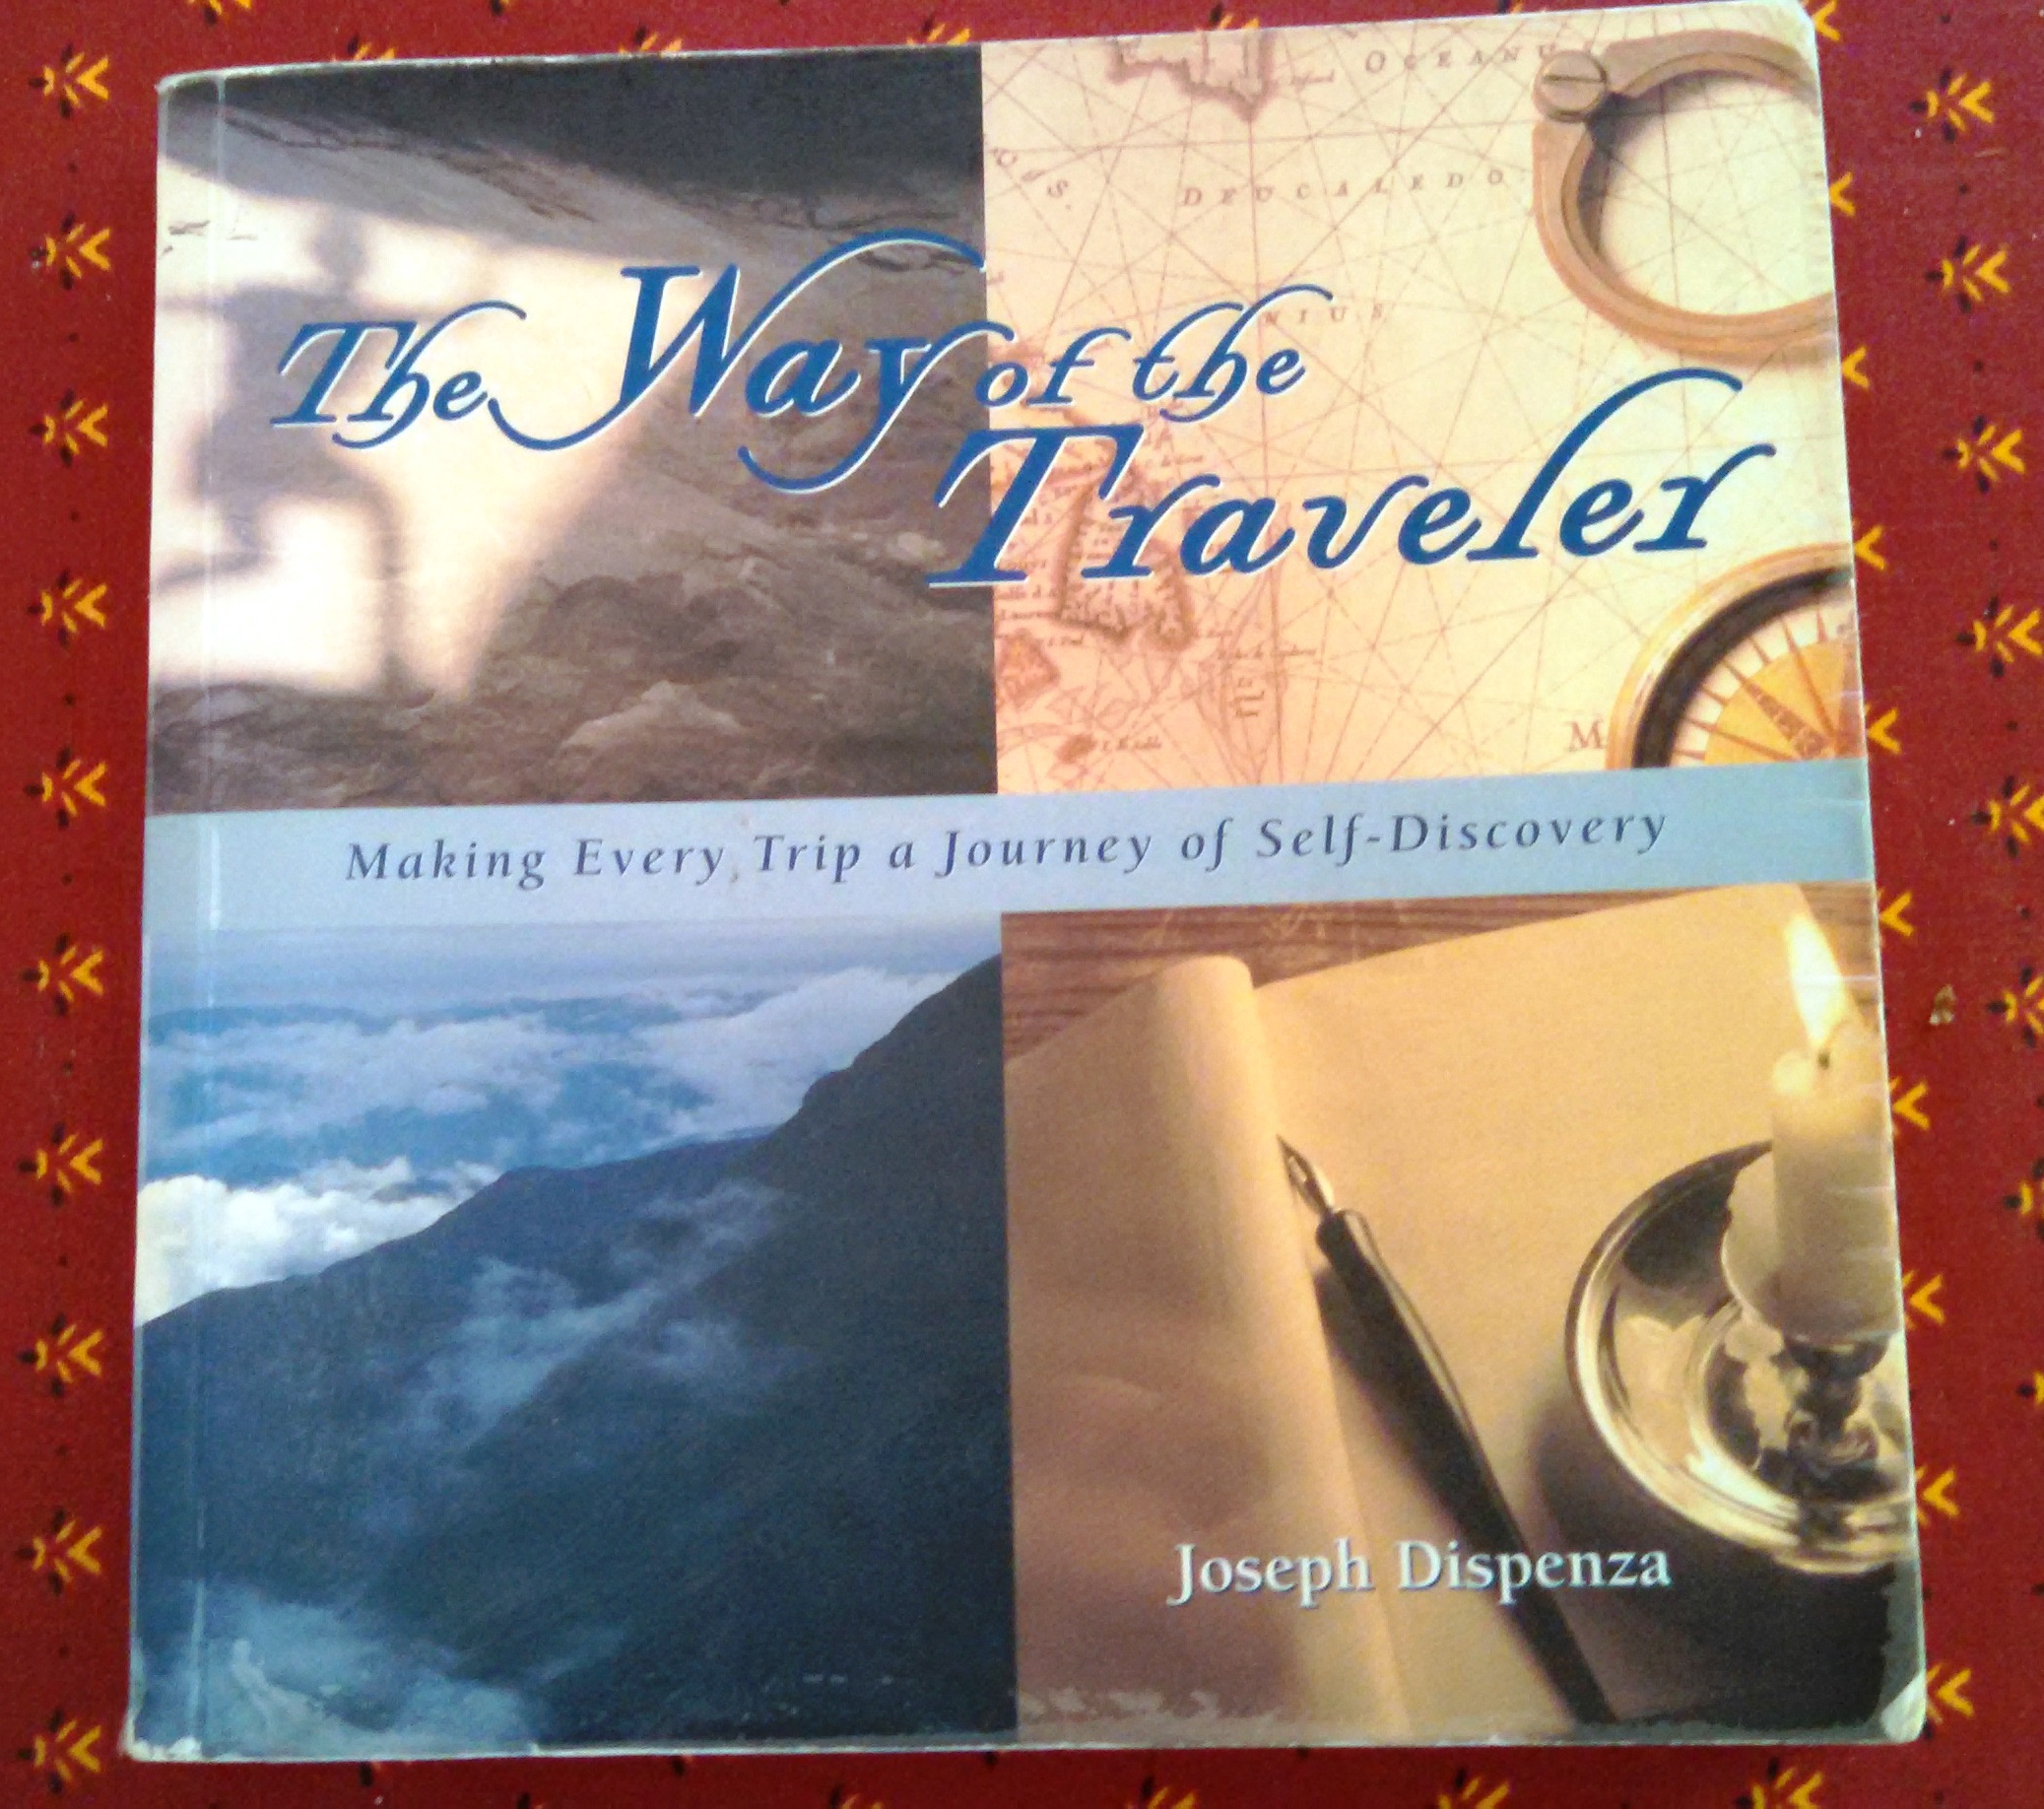 The Way of the Traveler Book.